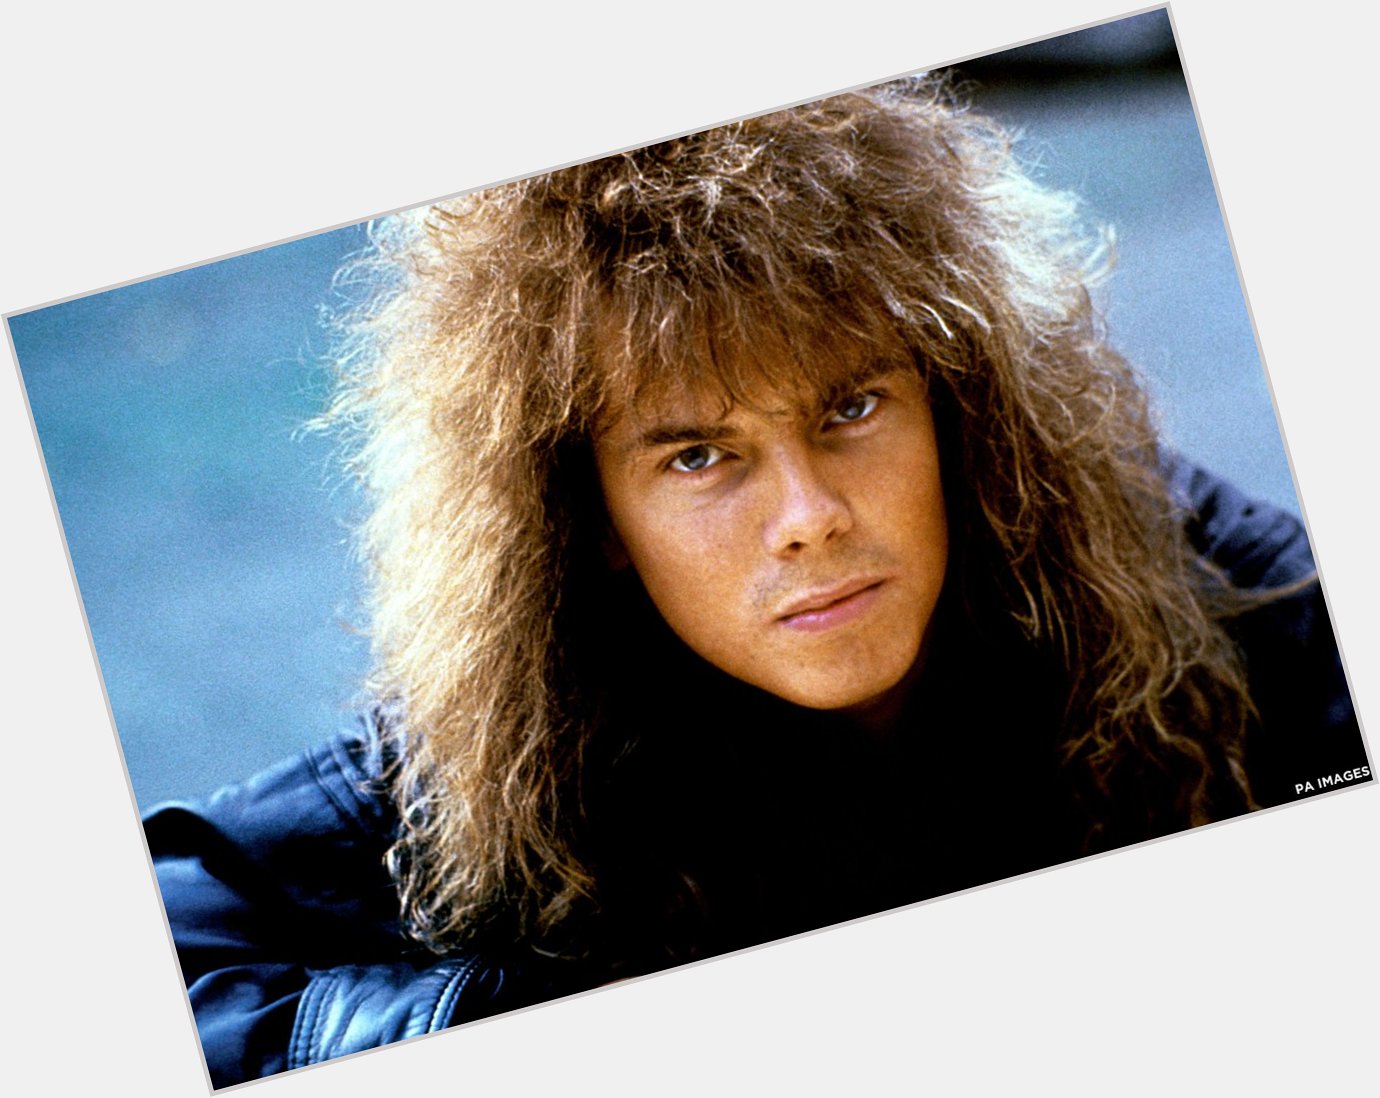 The Final Countdown keeps going, but today we stop for a moment to wish Joey Tempest of Europe a happy 52nd birthday. 